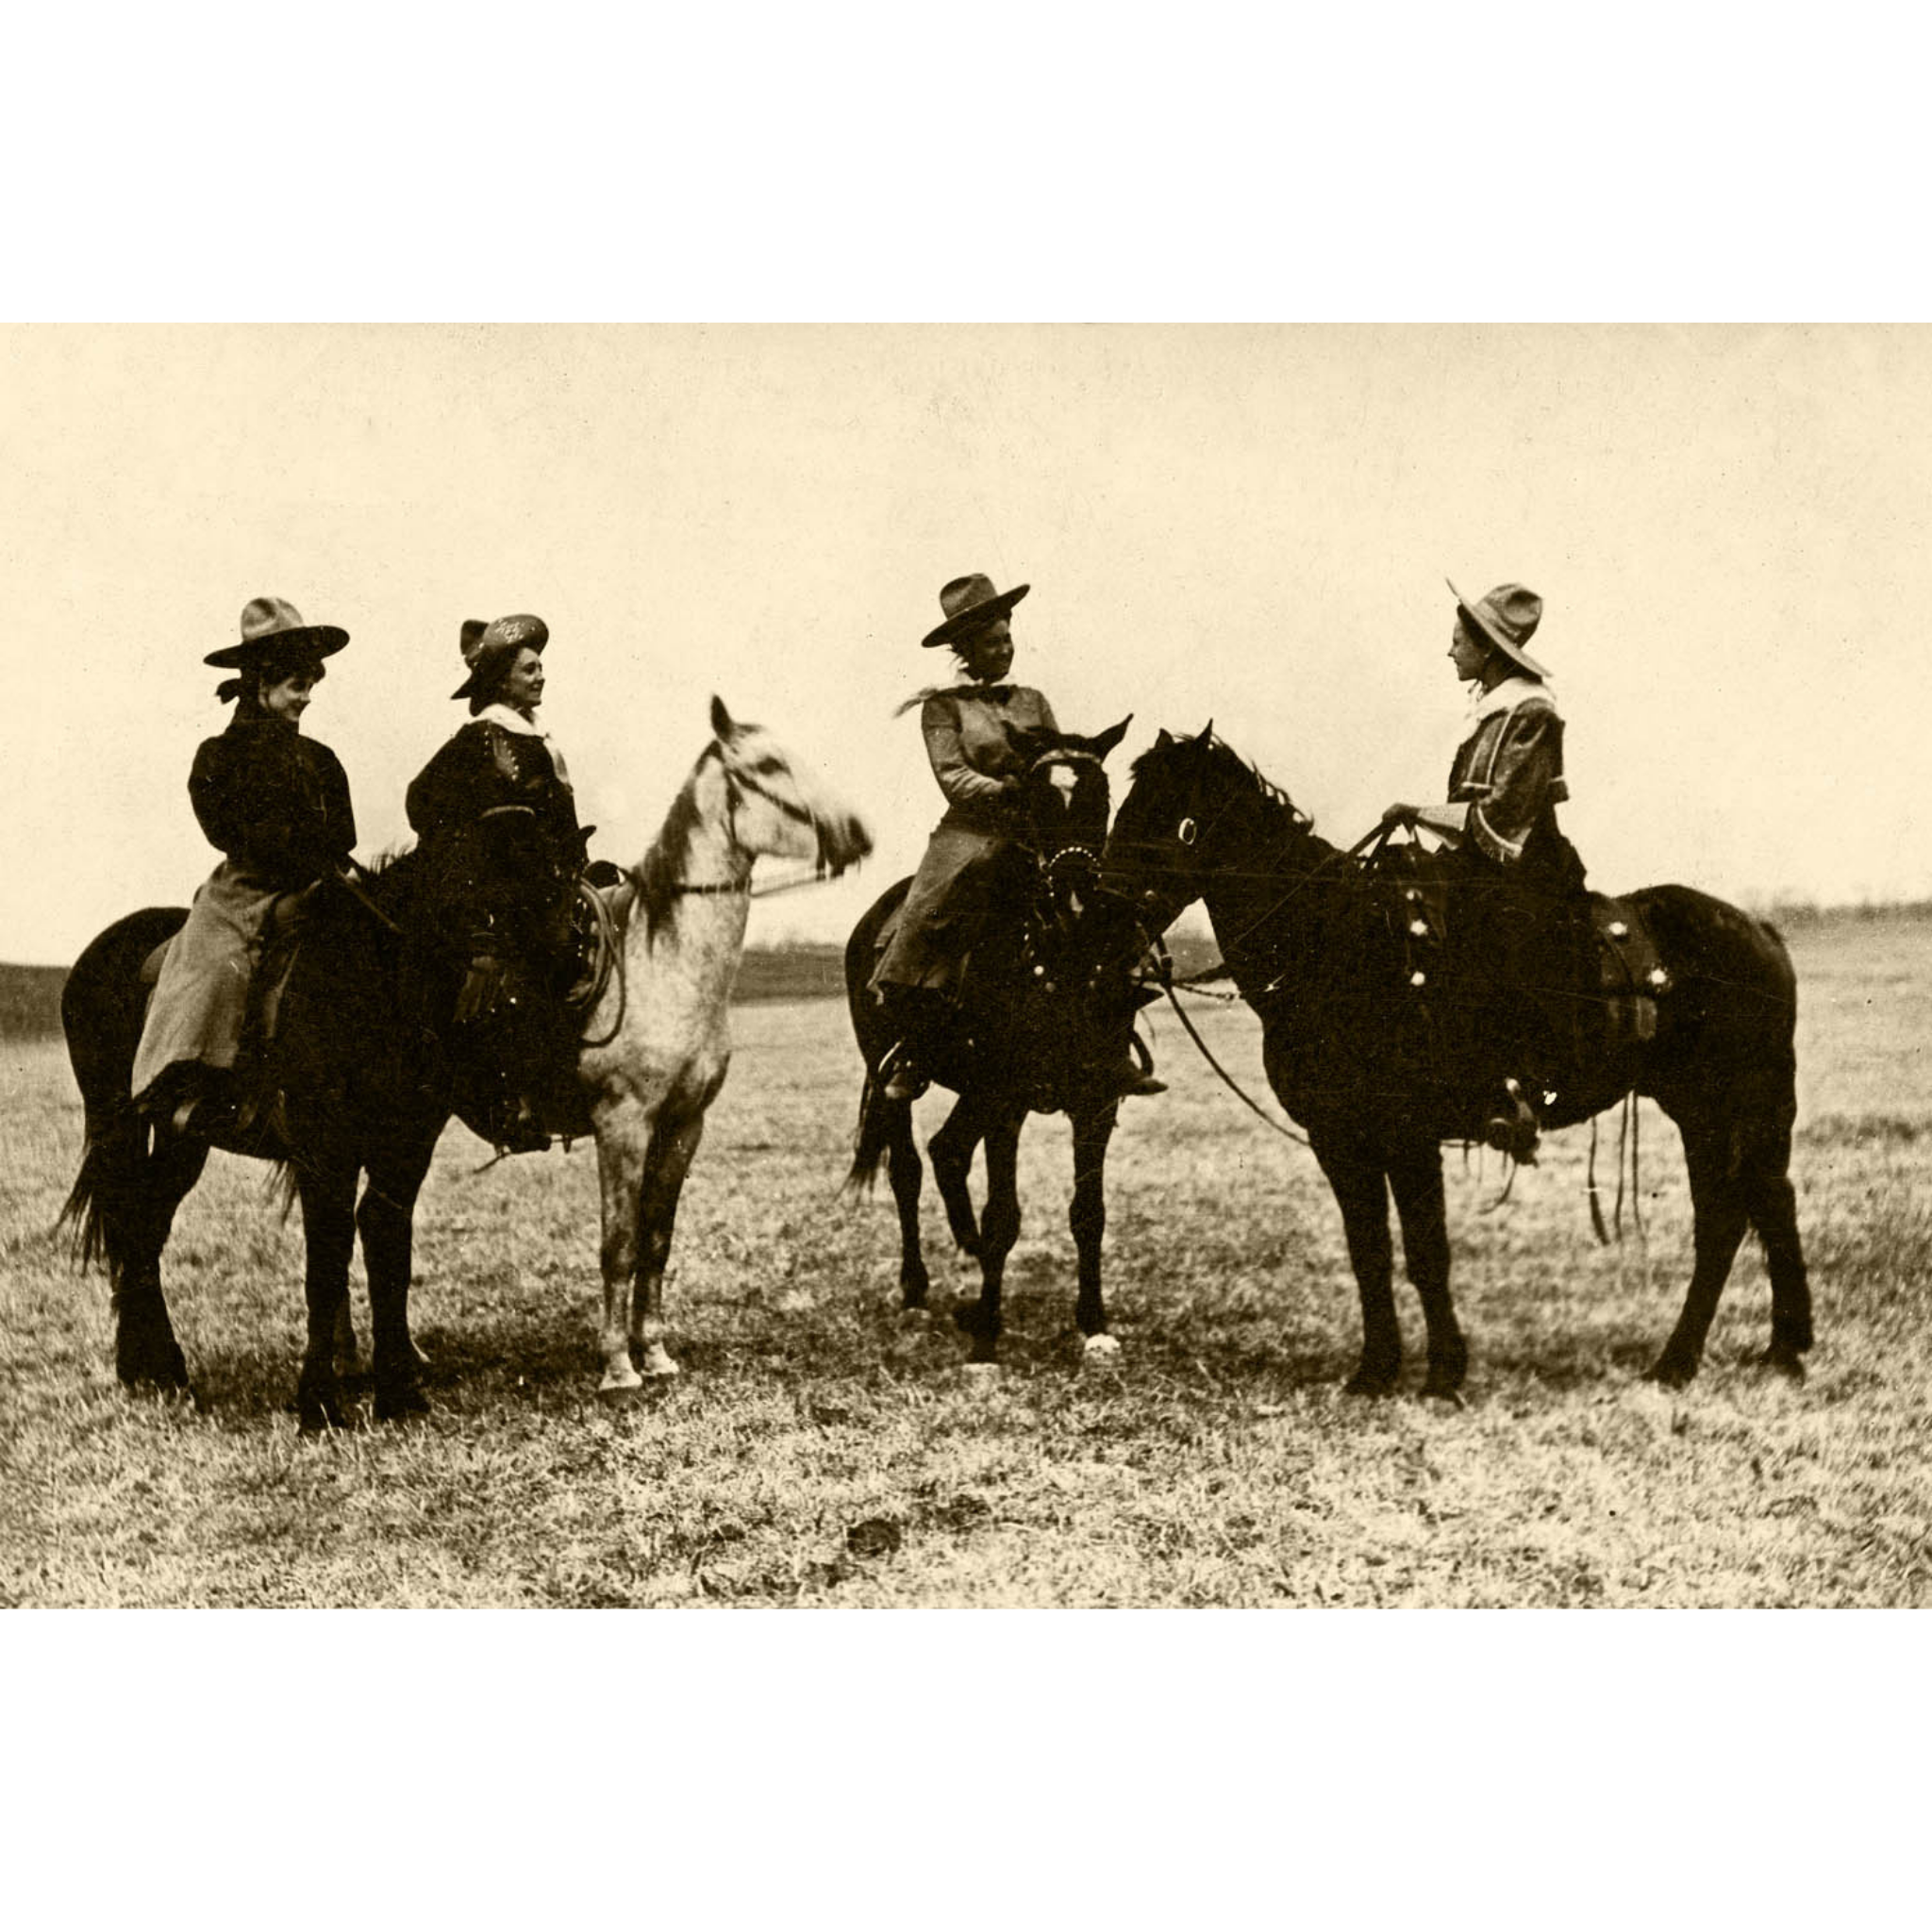 Four Cowgirls on the Plains - Doubleday - ca. 1915 Photograph